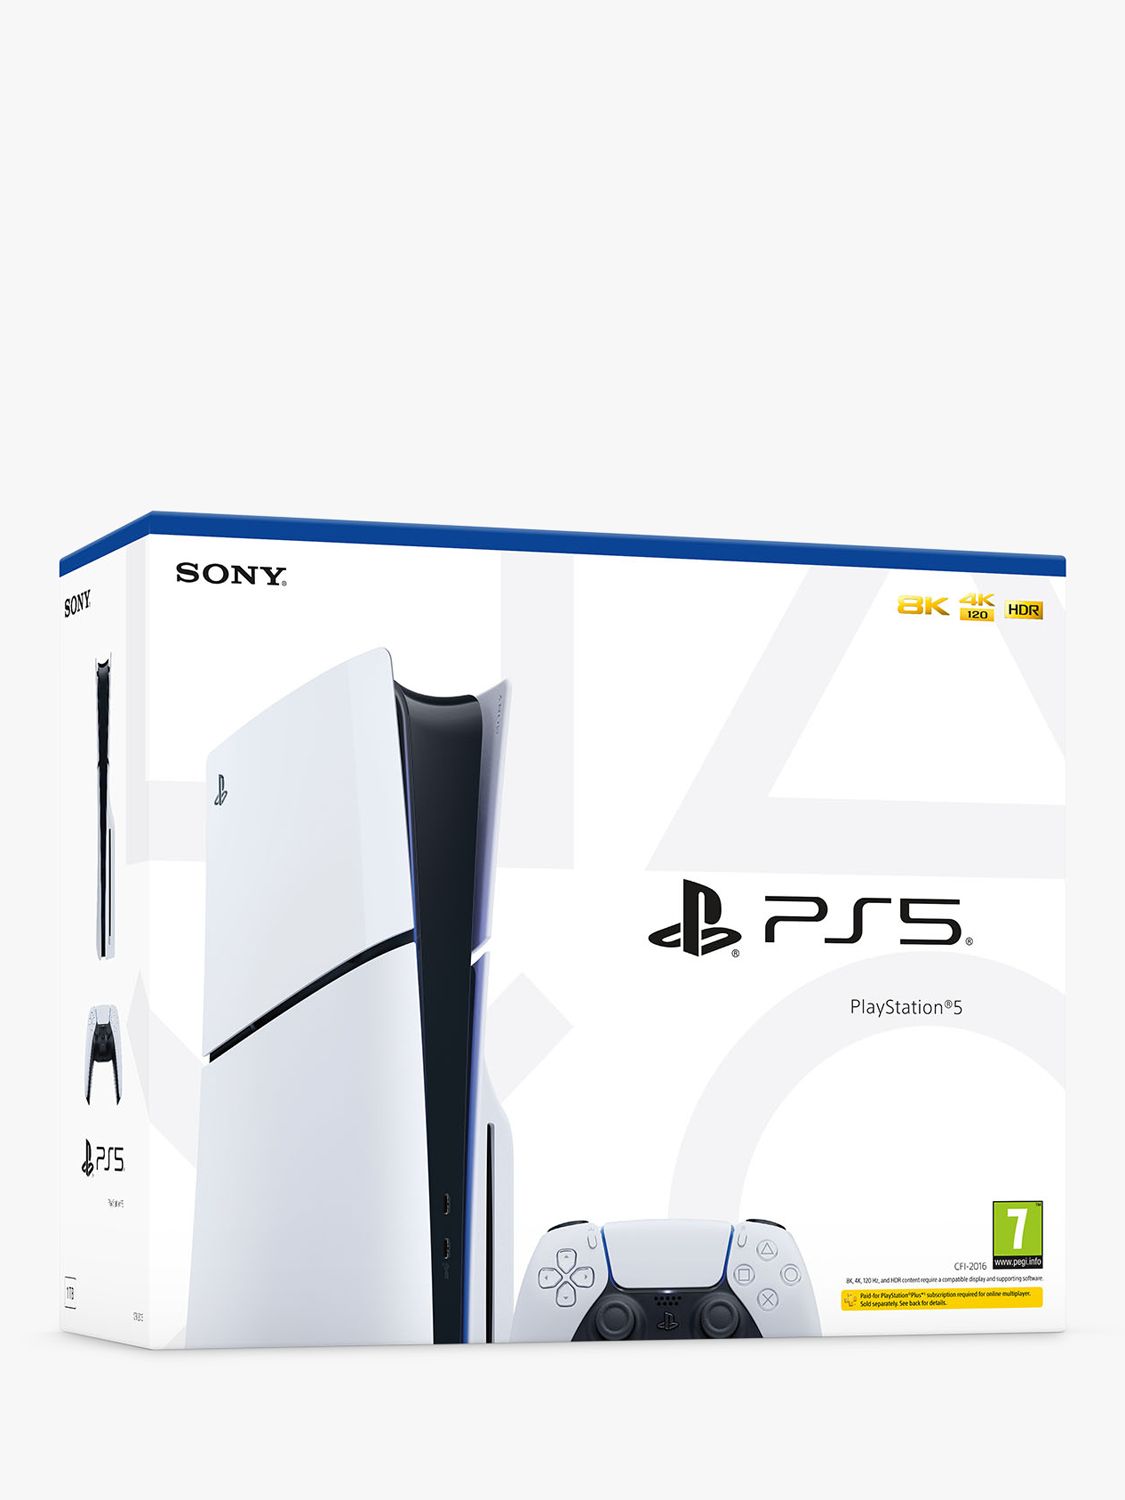 Remedy Entertainment - Happy 25th birthday to PlayStation! From